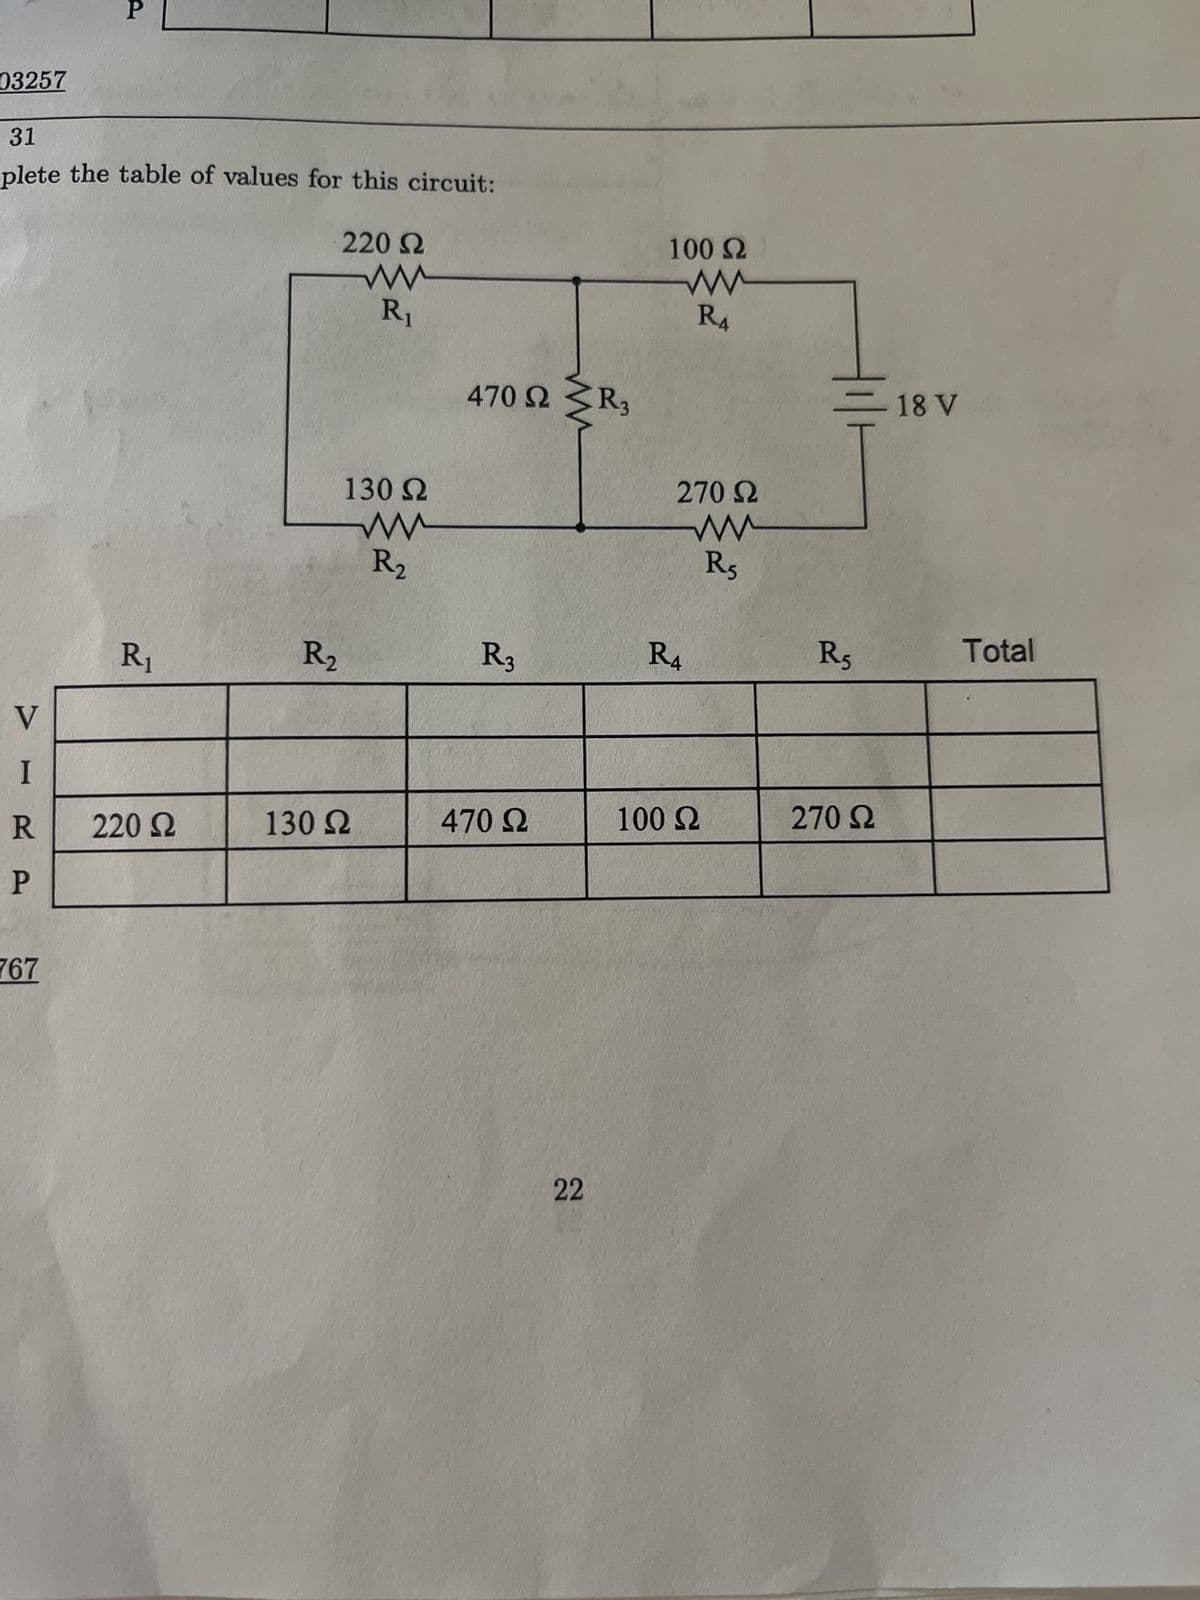 03257
31
plete the table of values for this circuit:
V
Ι
R
P
P
767
R₁
220 Ω
R₂
220 Ω
Μ
R₁
130 Ω
Μ
130 Ω
R2
470 Ω Σ R3
R3
470 Ω
22
100 Ω
R4
270 Ω
www
R5
R4
100 Ω
R5
270 Ω
18 V
Total